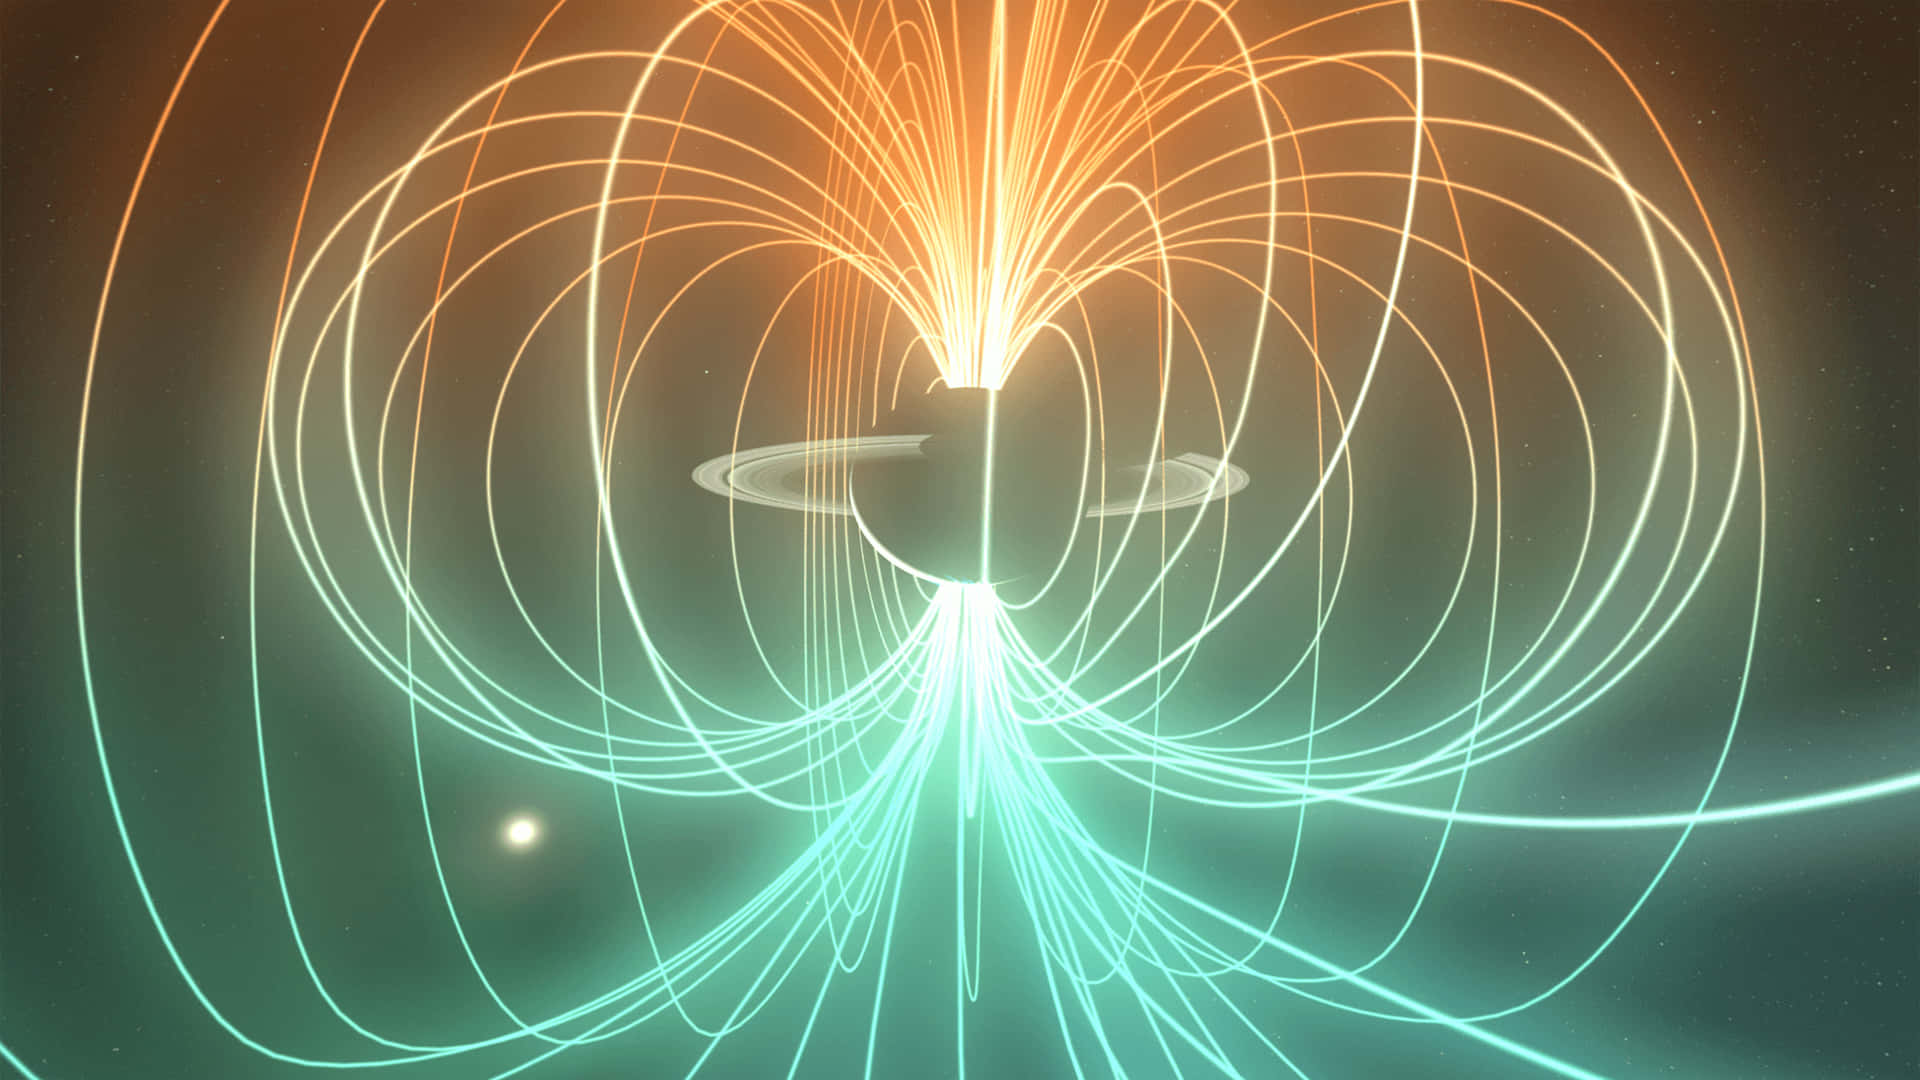 Caption: Mysteries Of The Hyperbolic Magnetic Field Wallpaper